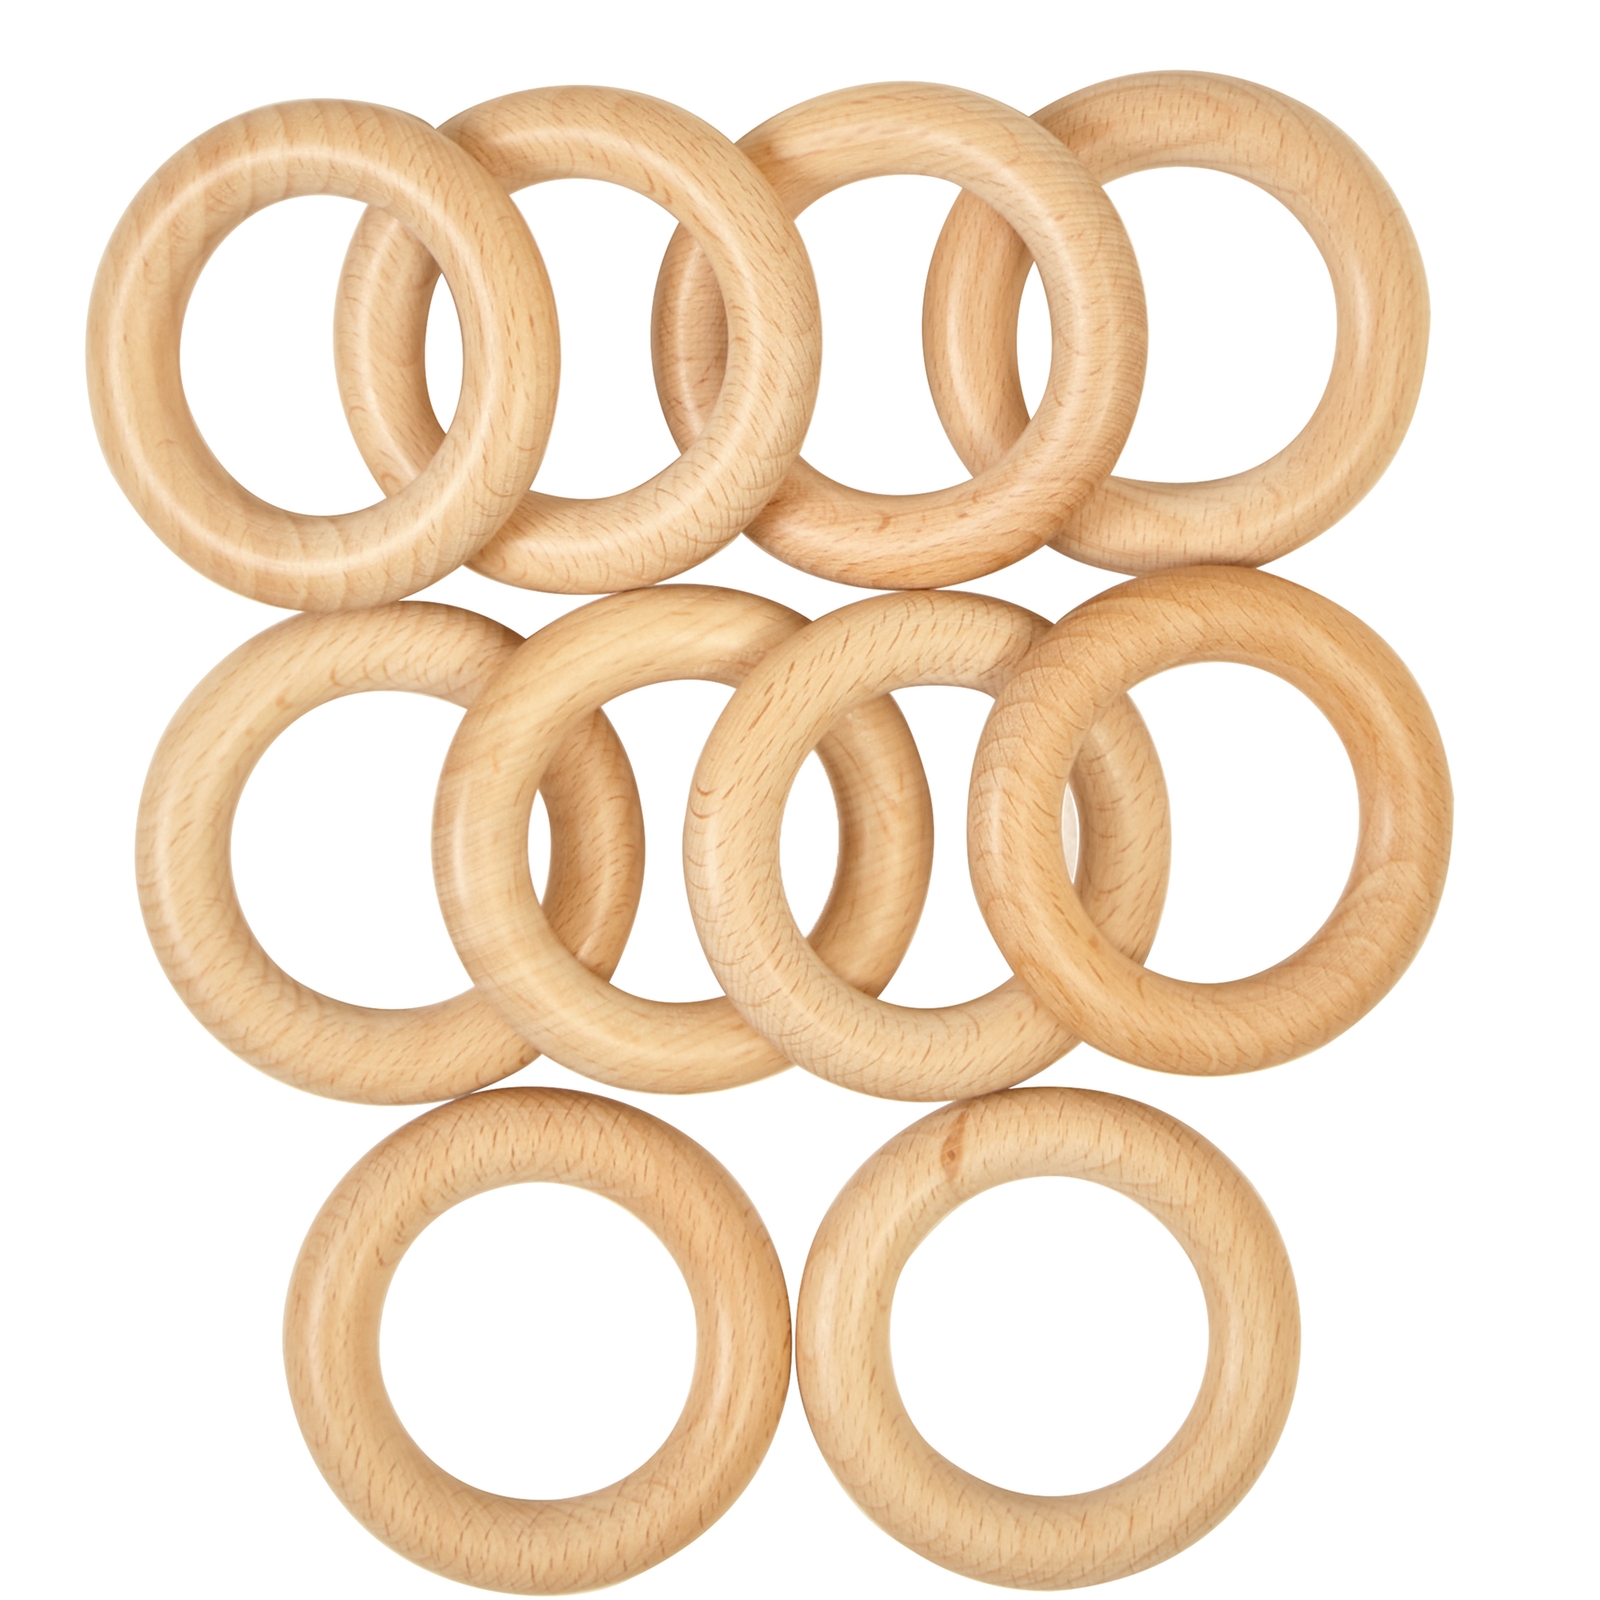 Wooden Sensory Rings from Hope Education - Pack of 10